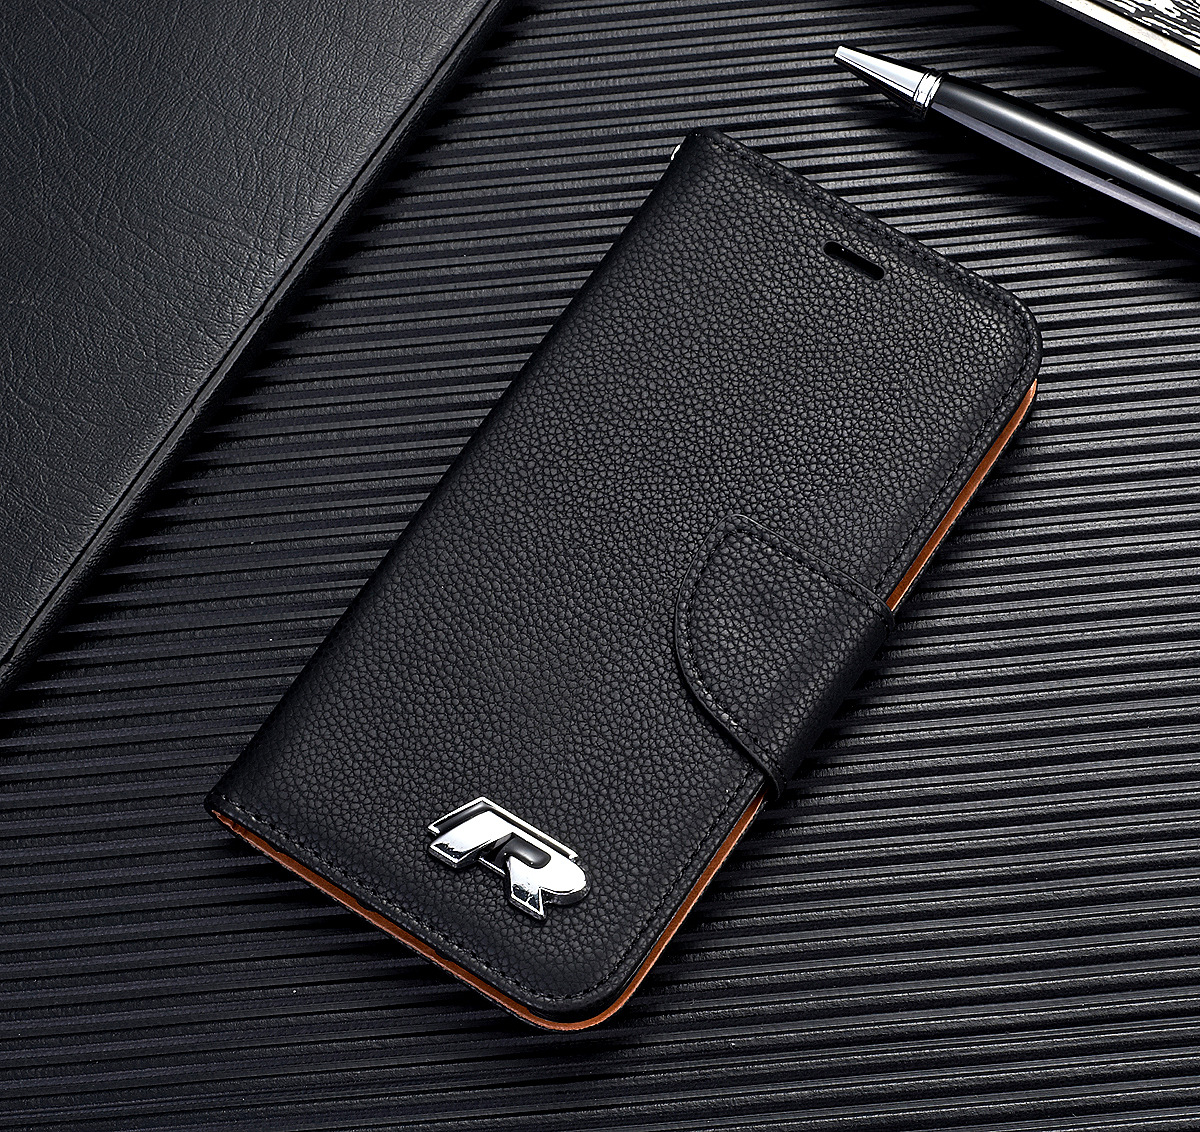 🔥HOT SALE 50% OFF 🚗Car logo-book type leather case